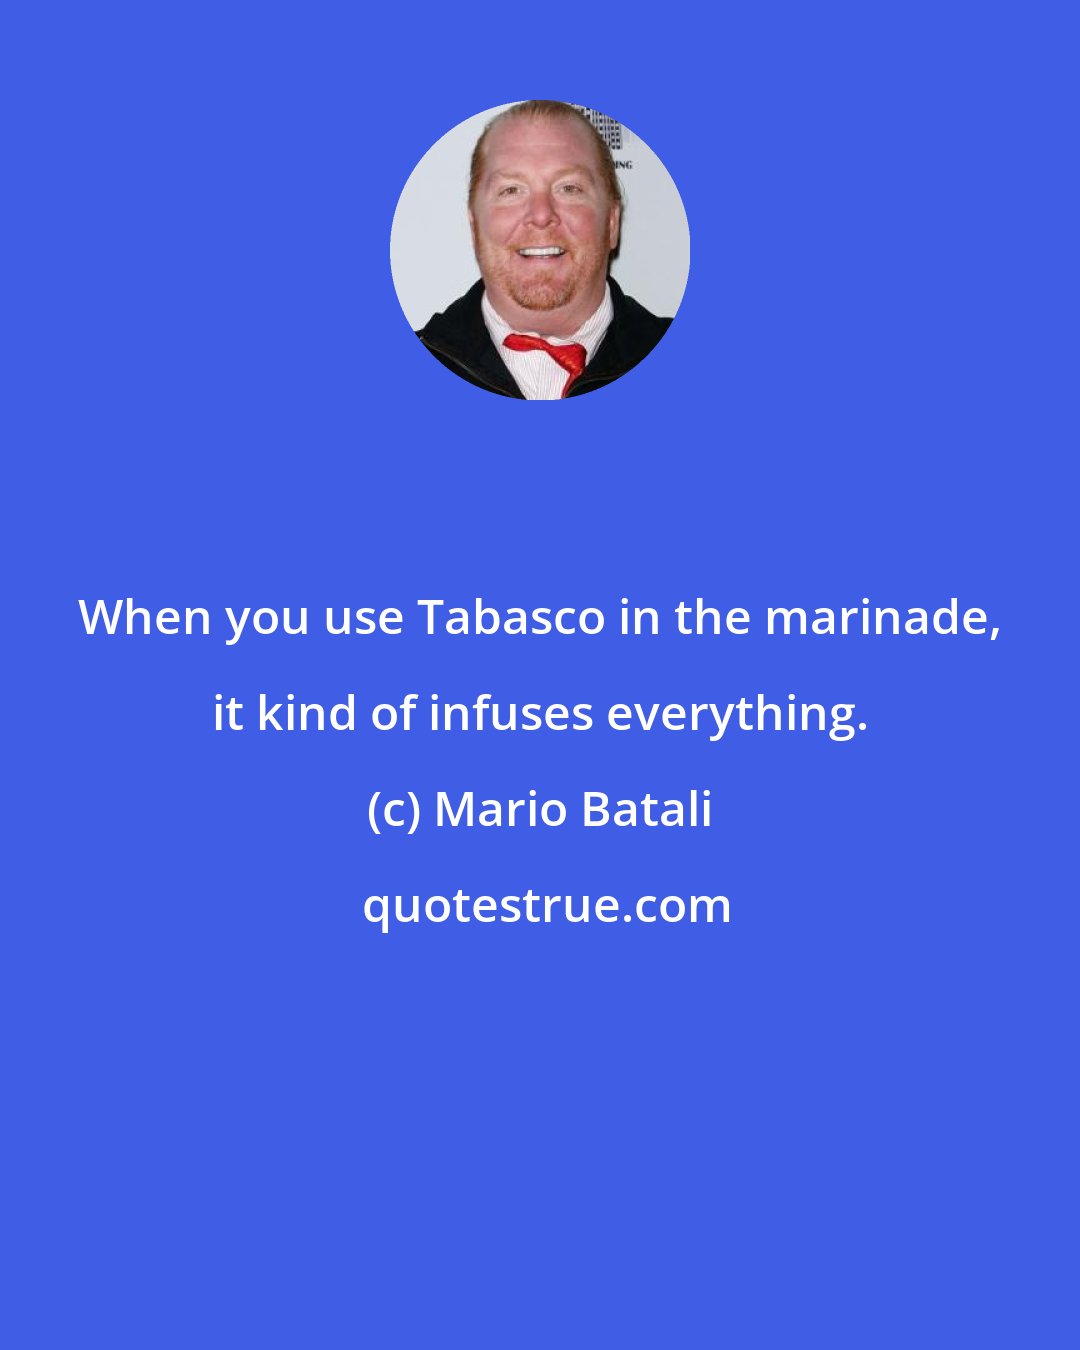 Mario Batali: When you use Tabasco in the marinade, it kind of infuses everything.